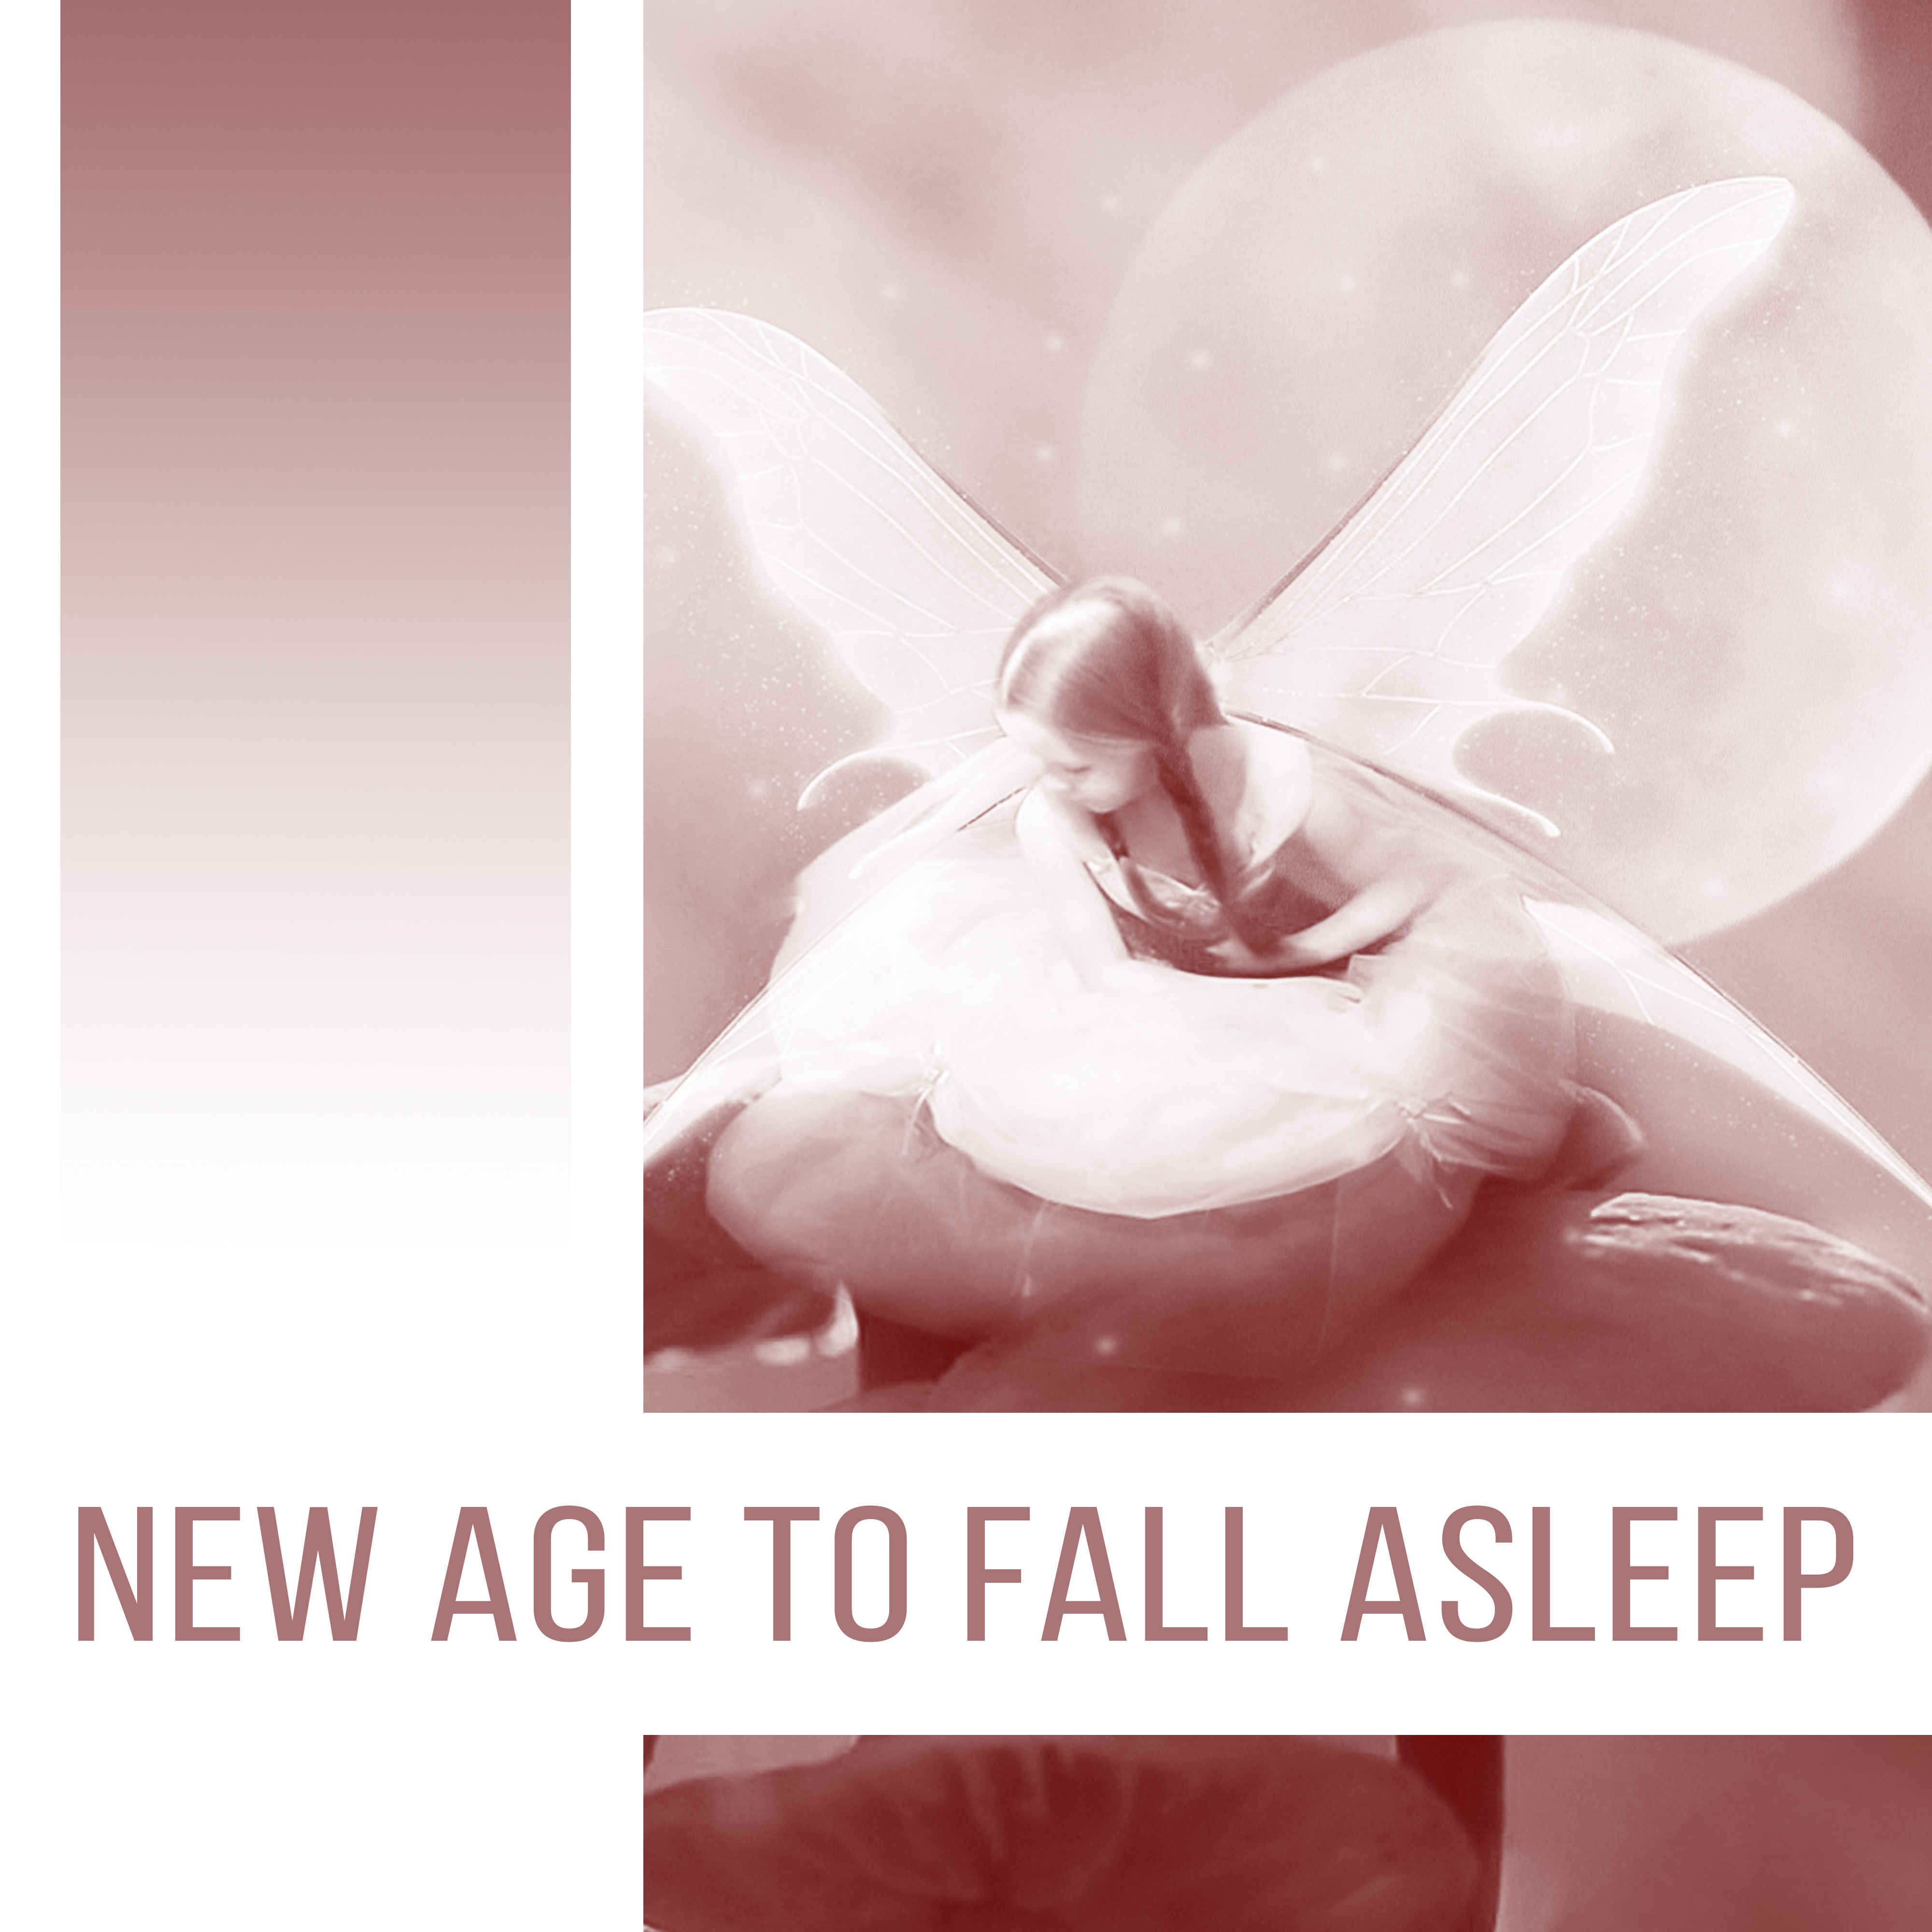 New Age to Fall Asleep – Soothing Sounds for Calm Sleep, Rest with New Age Sounds, Sleep All Night, Evening Music